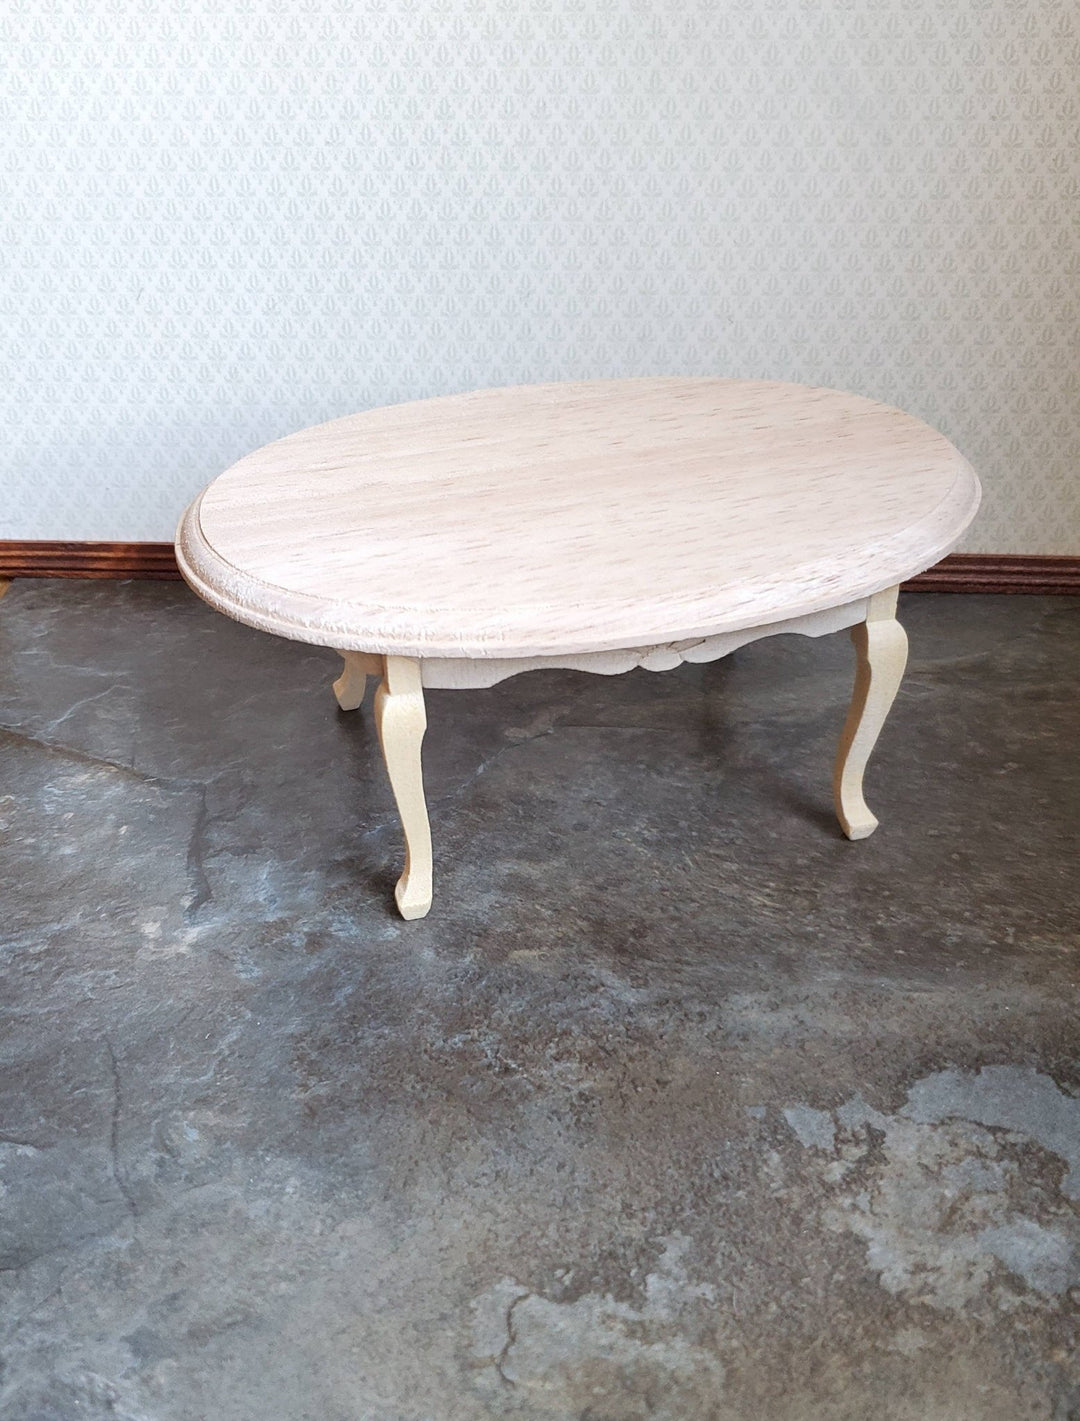 Dollhouse Miniature Table Oval Dining Room Unfinished 1:12 Scale 6" - Miniature Crush